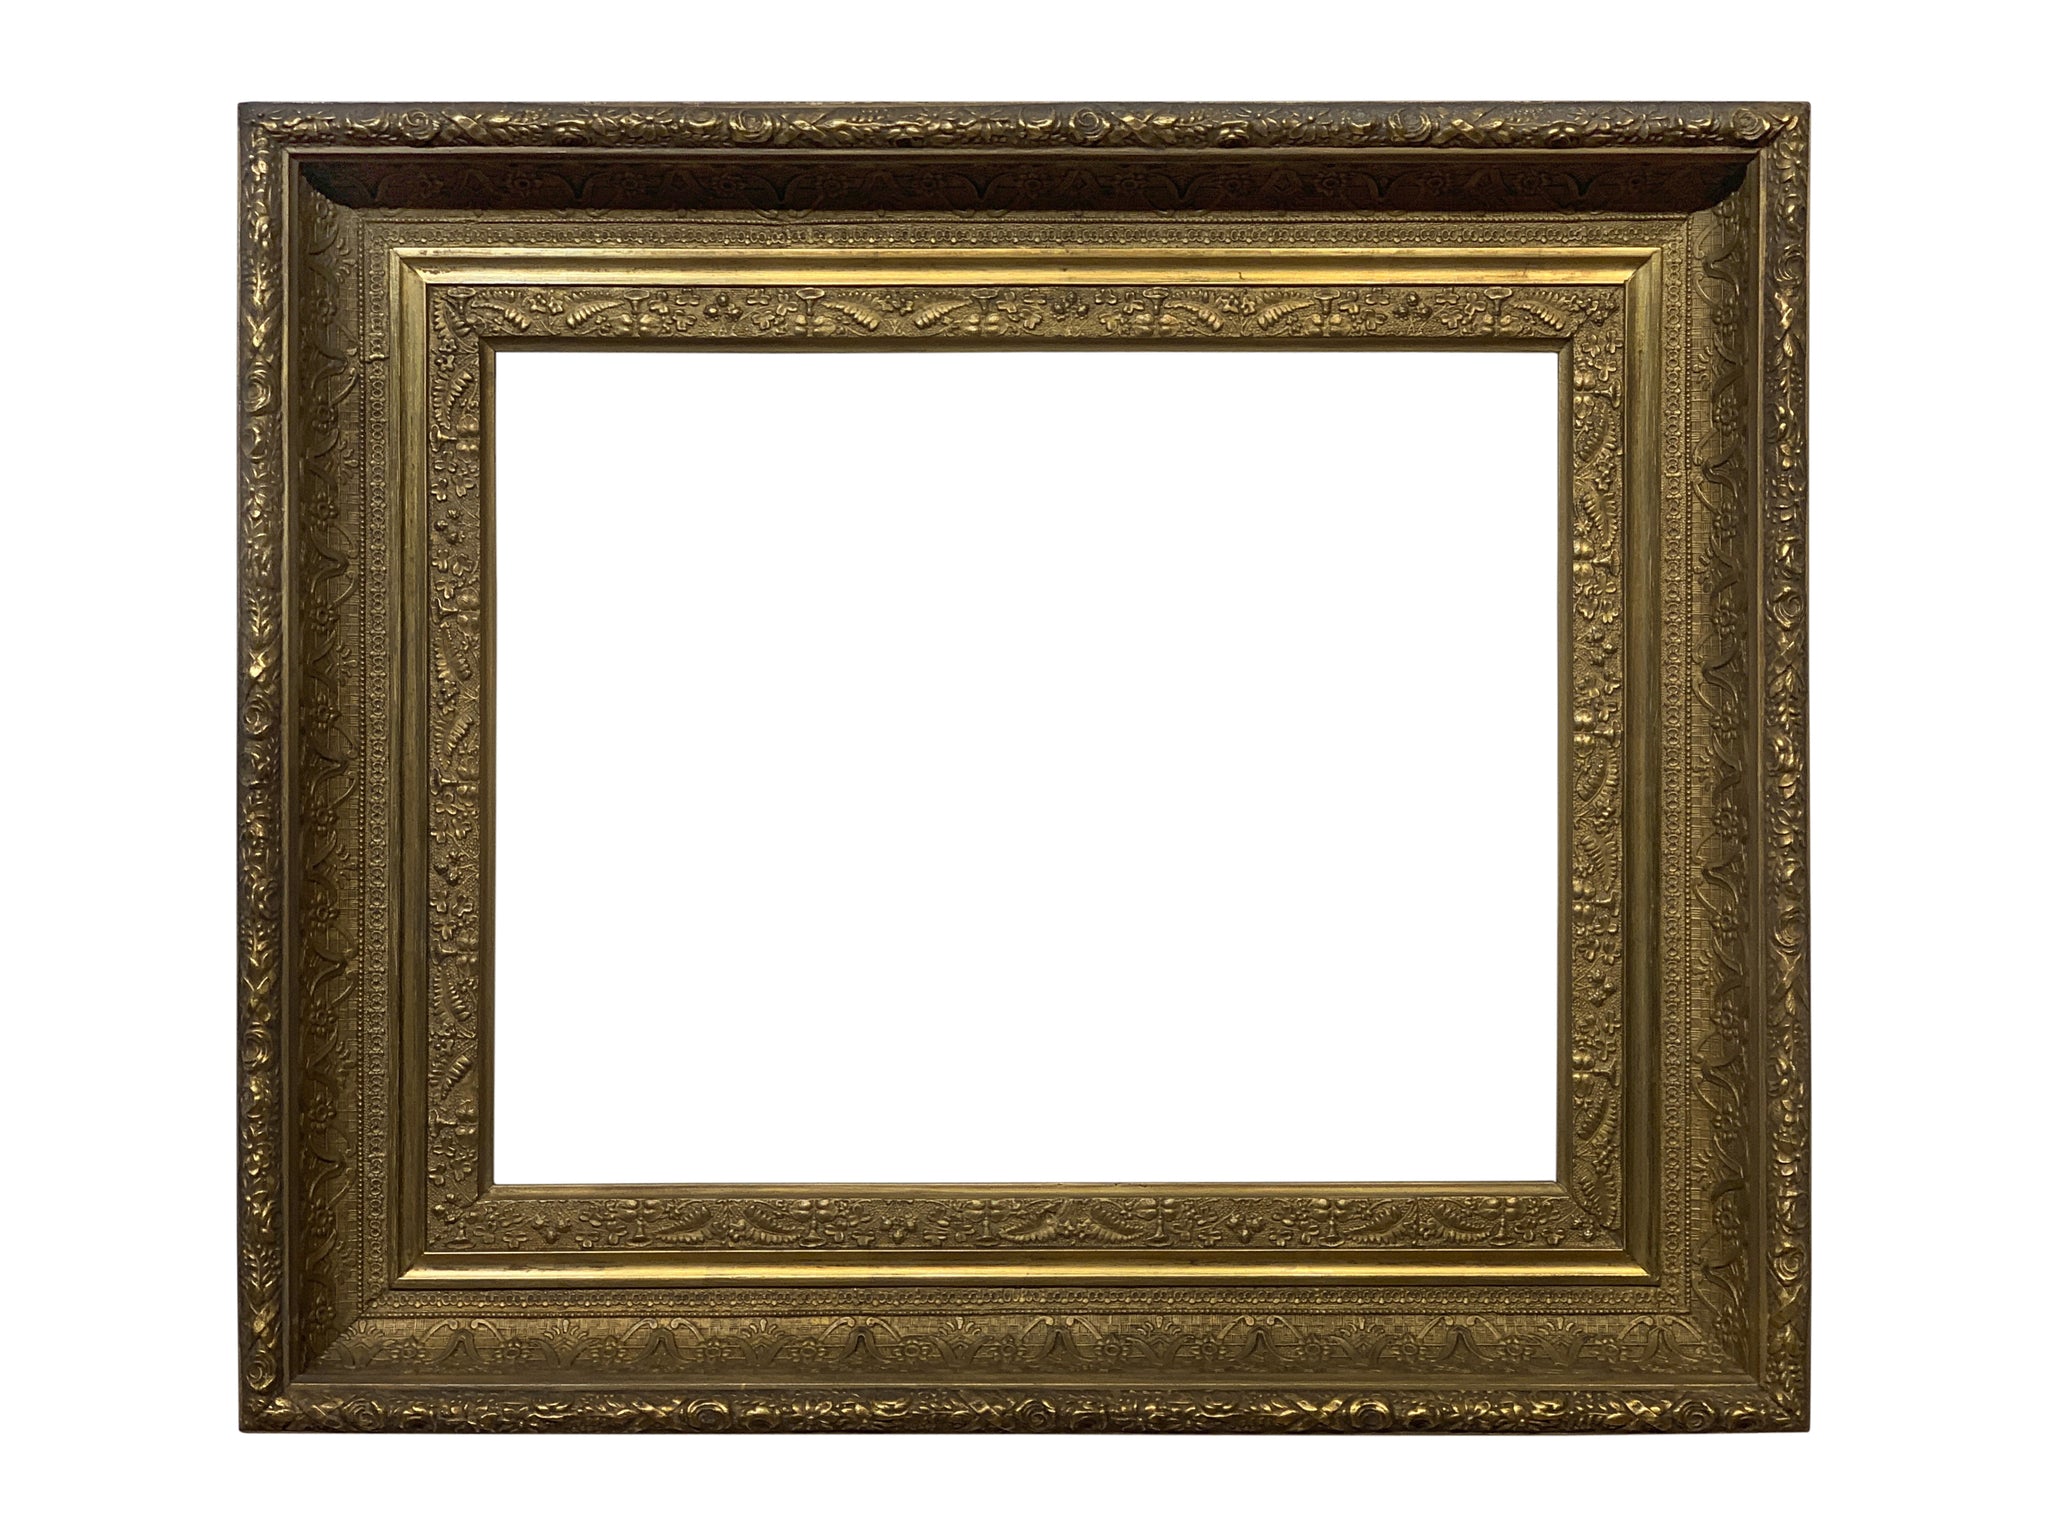 American 16x20 Inch Antique Gold Picture Frame for canvas art circa 1880 (19th Century).